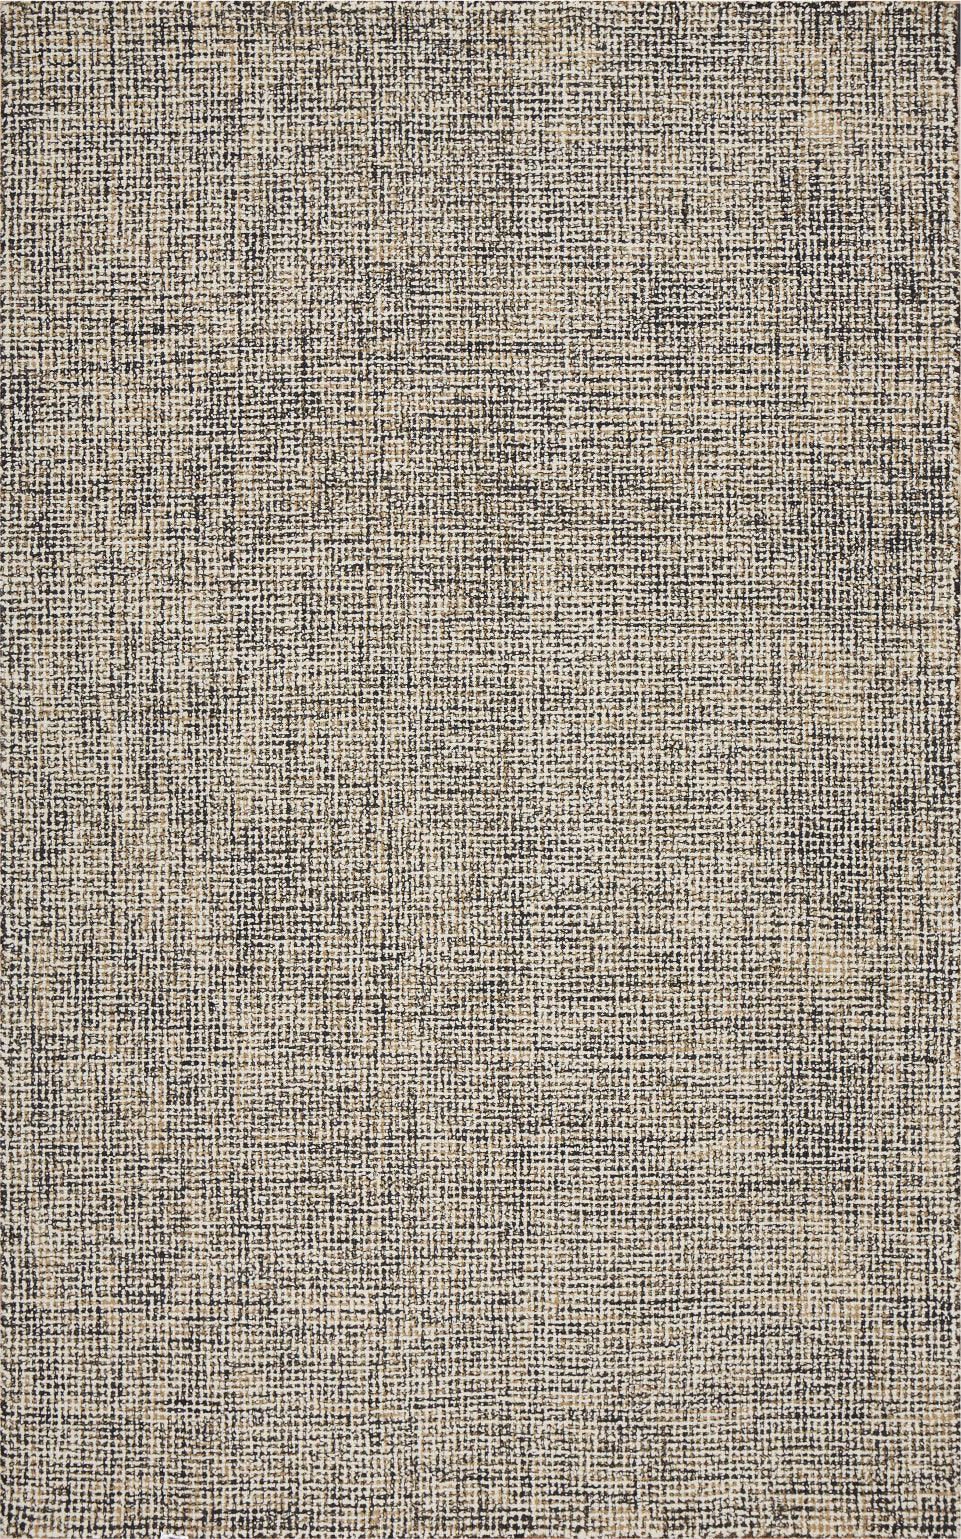 LR Resources Criss Cross 81299 Charcoal / Gold Area Rug main image